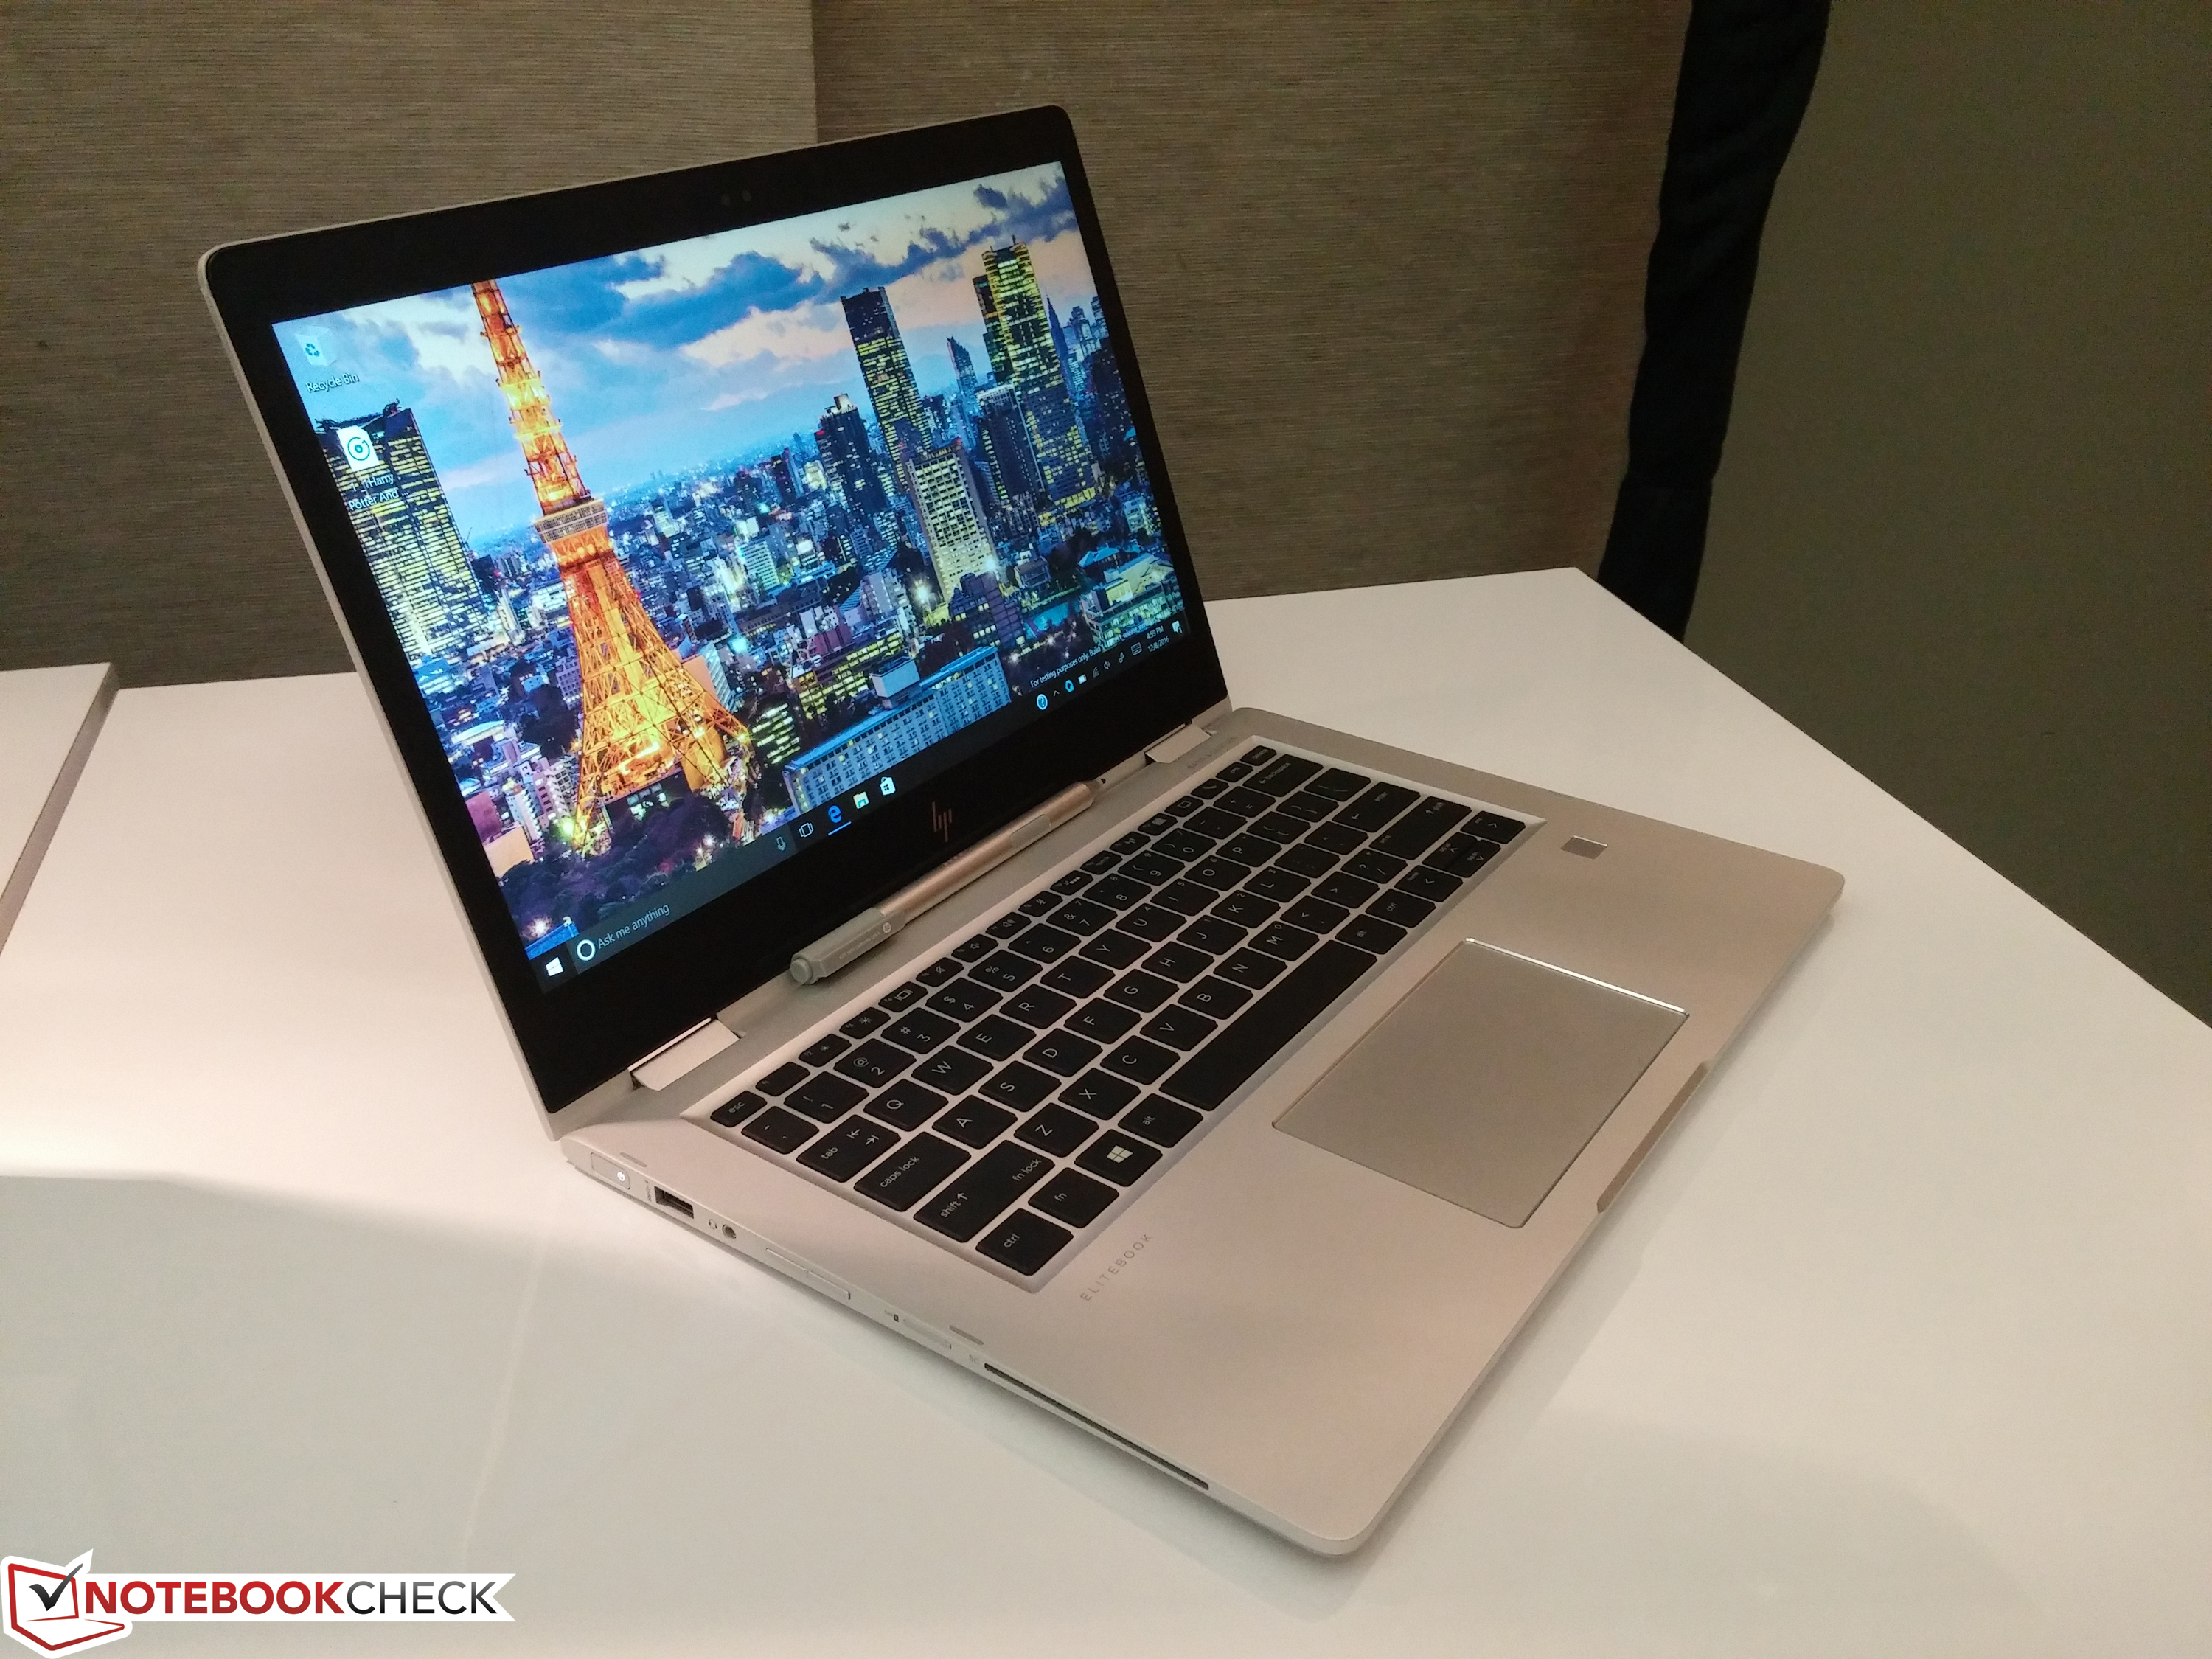 HP EliteBook x360 is the world's thinnest 13-inch convertible